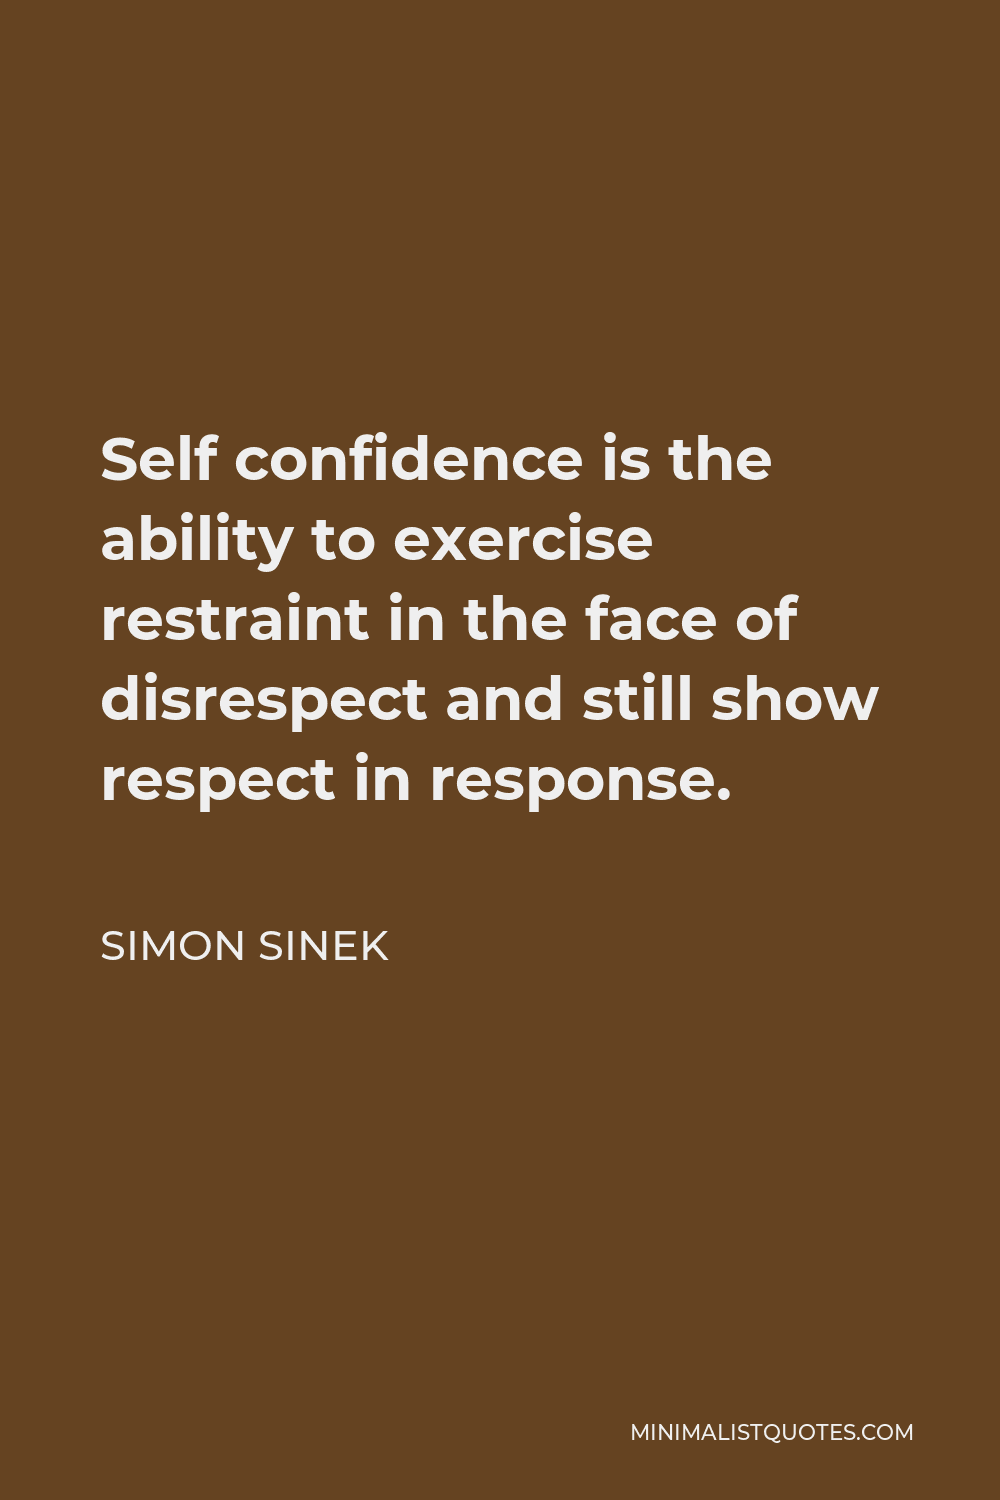 Simon Sinek Quote - Self confidence is the ability to exercise restraint in the face of disrespect and still show respect in response.